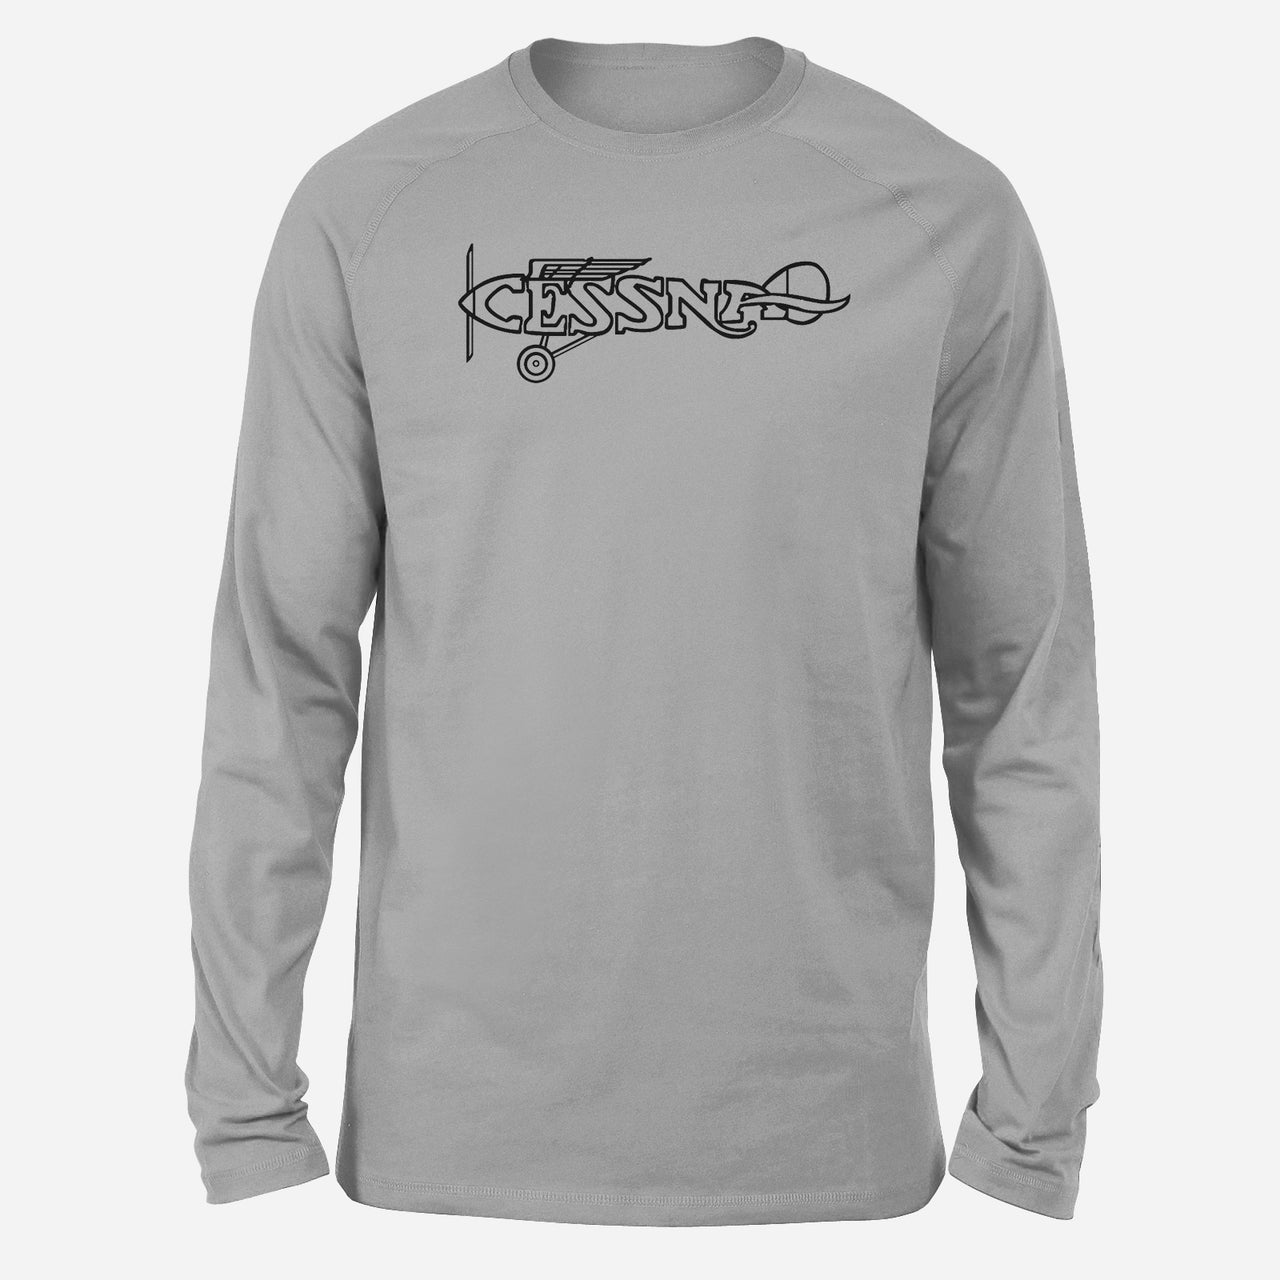 Special Cessna Text Designed Long-Sleeve T-Shirts